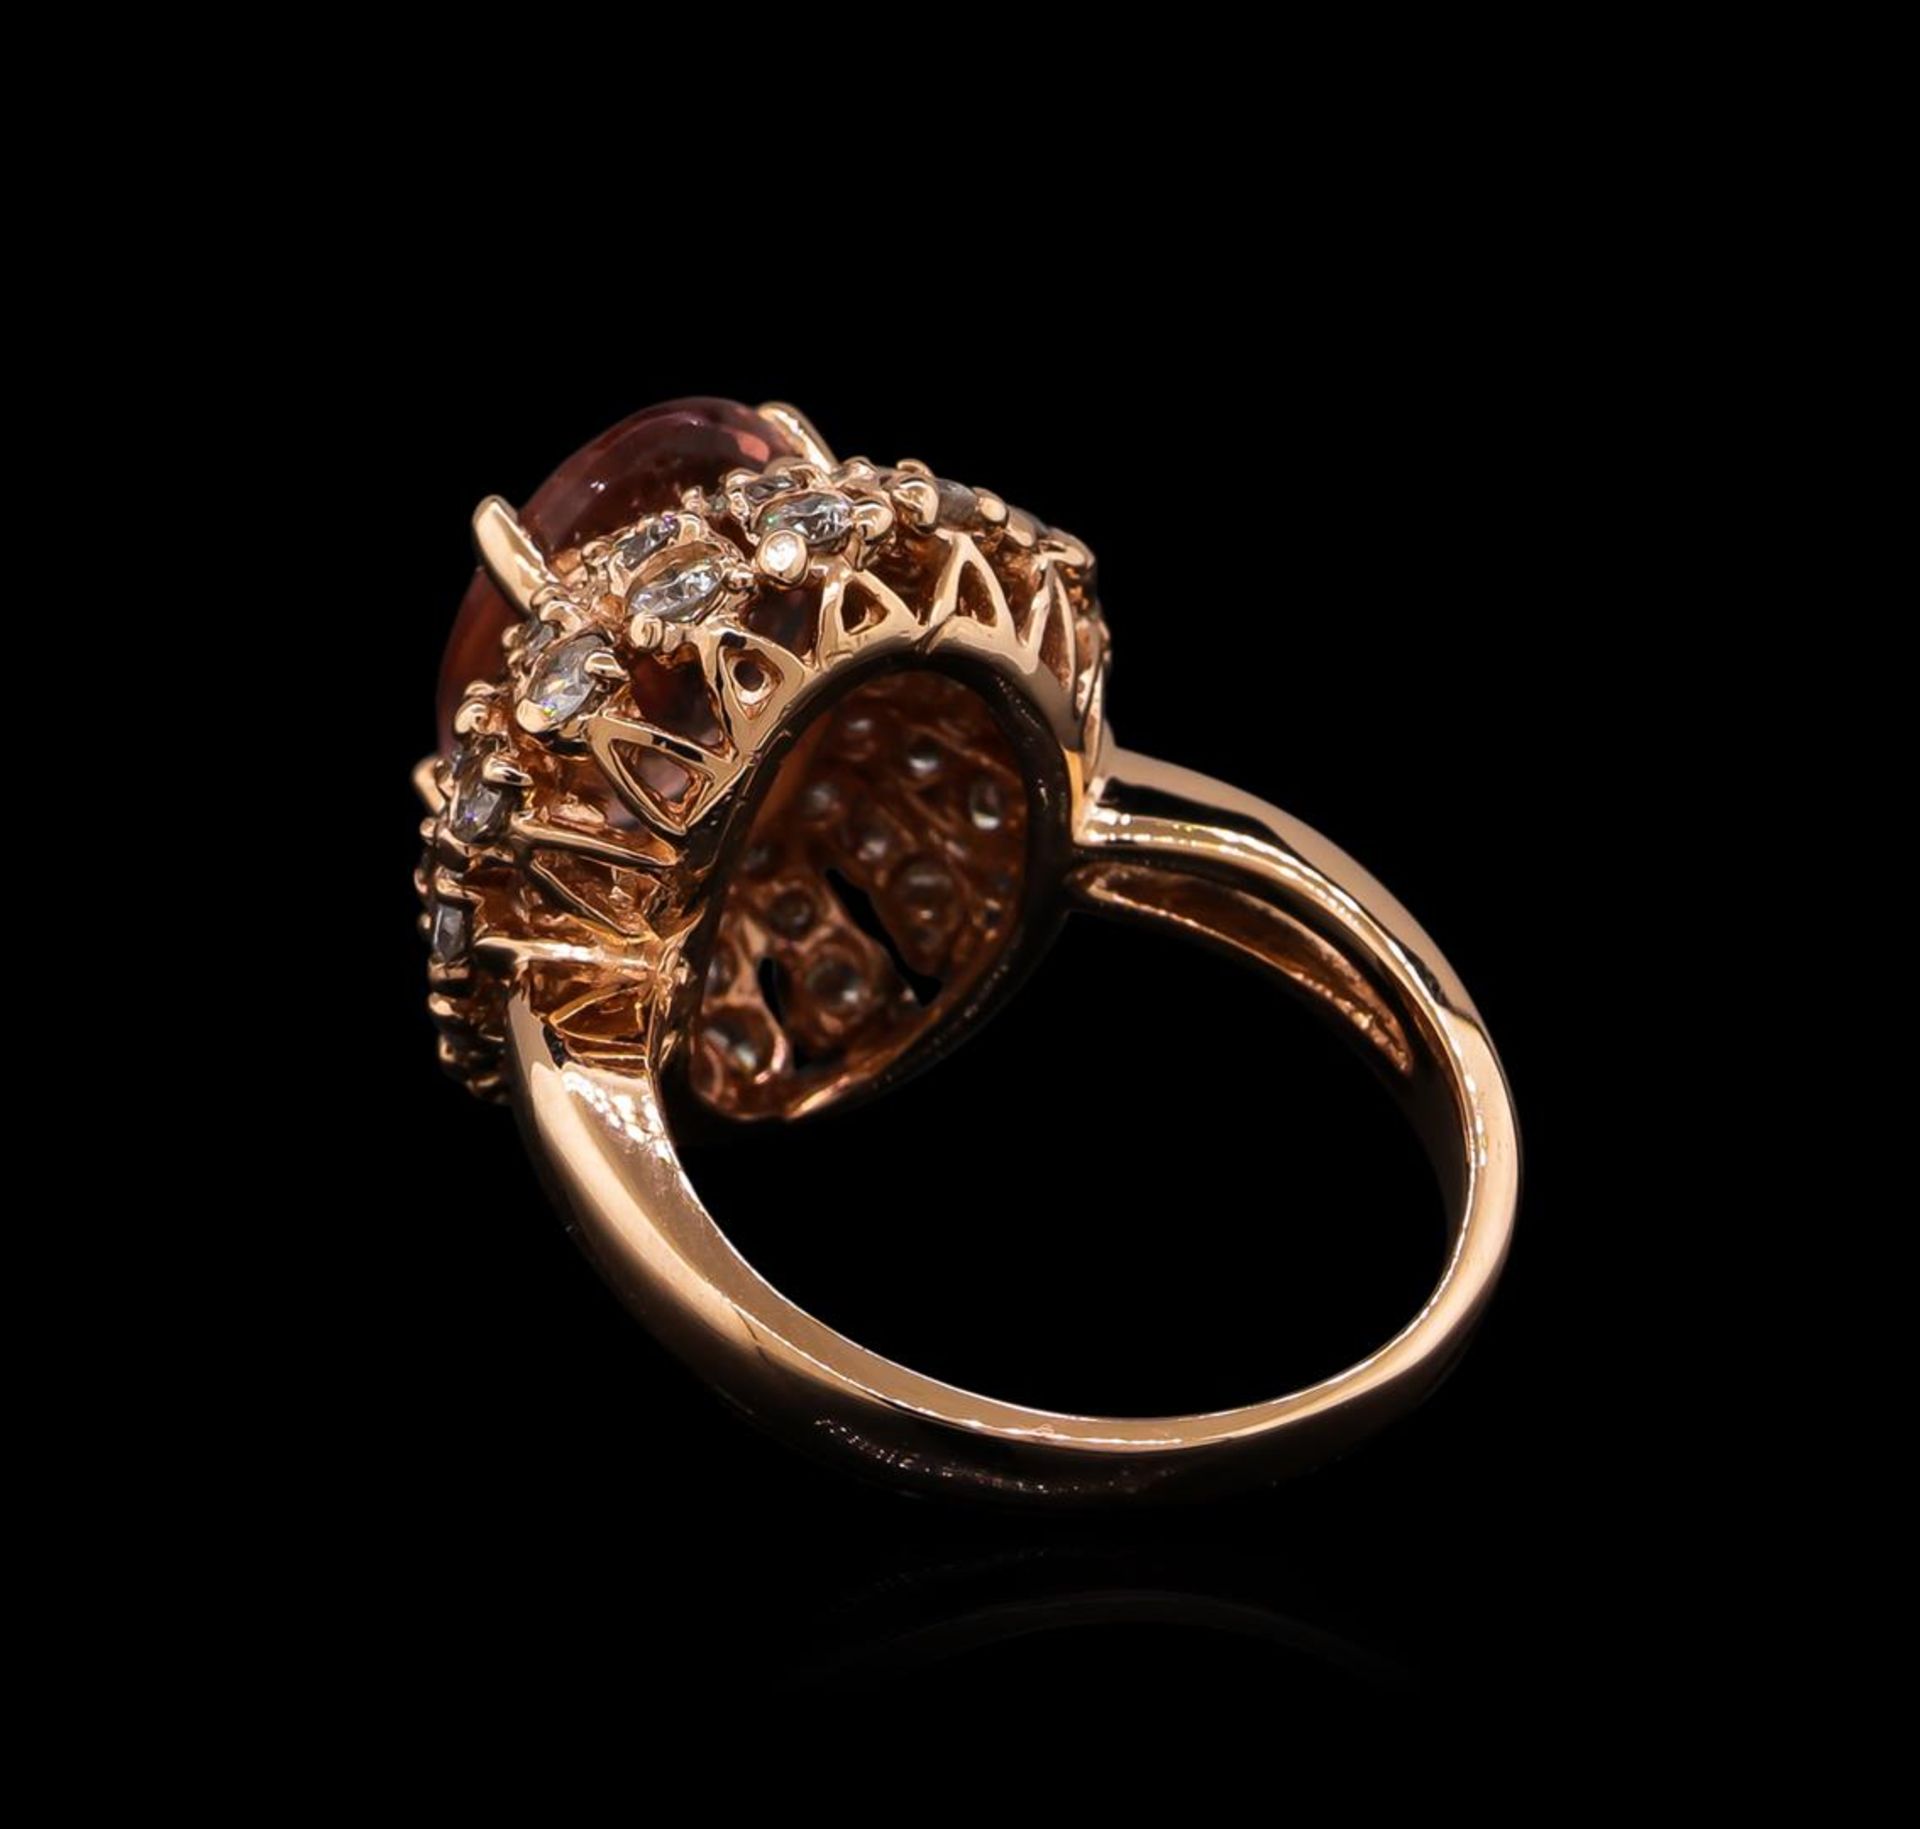 3.70 ct Tourmaline and Diamond Ring - 14KT Rose Gold - Image 3 of 6